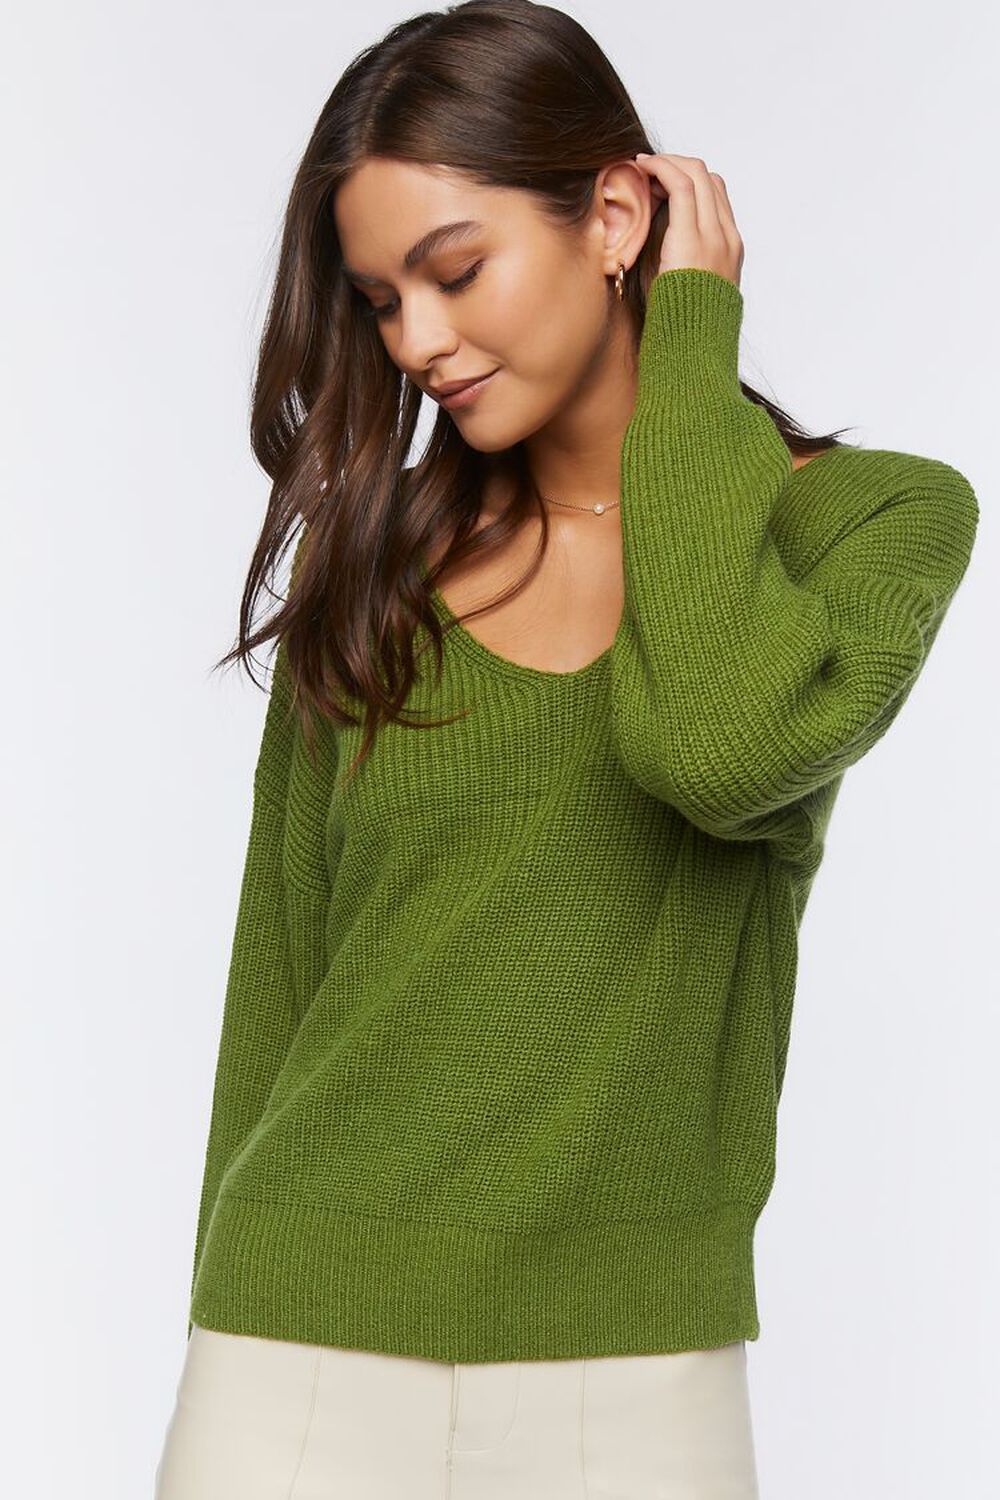 OLIVE Ribbed Drop-Sleeve Sweater, image 1